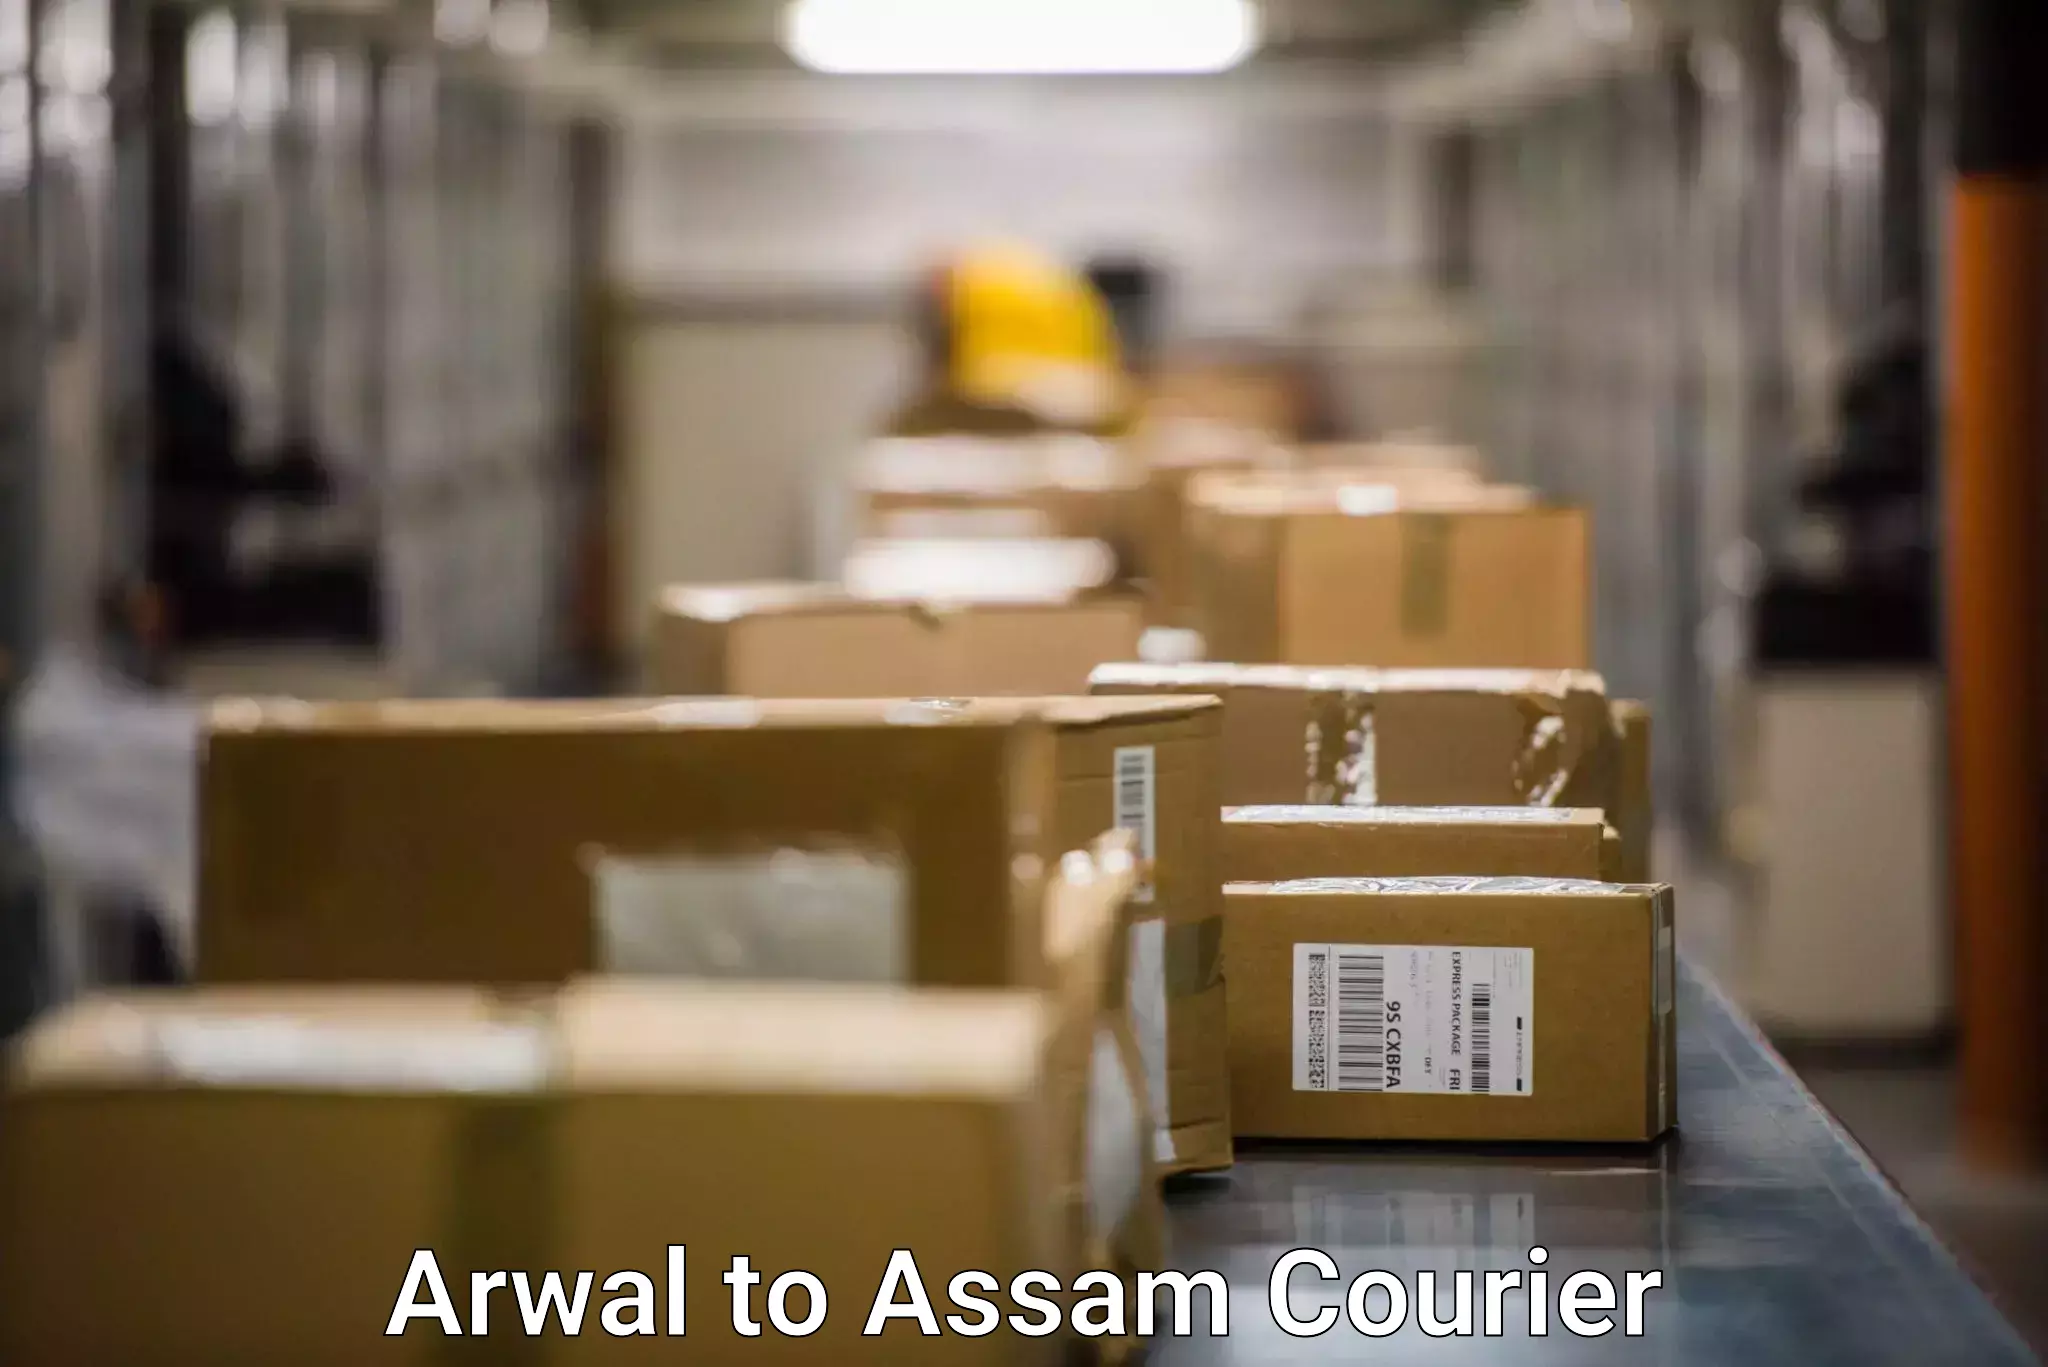 Global courier networks Arwal to Assam